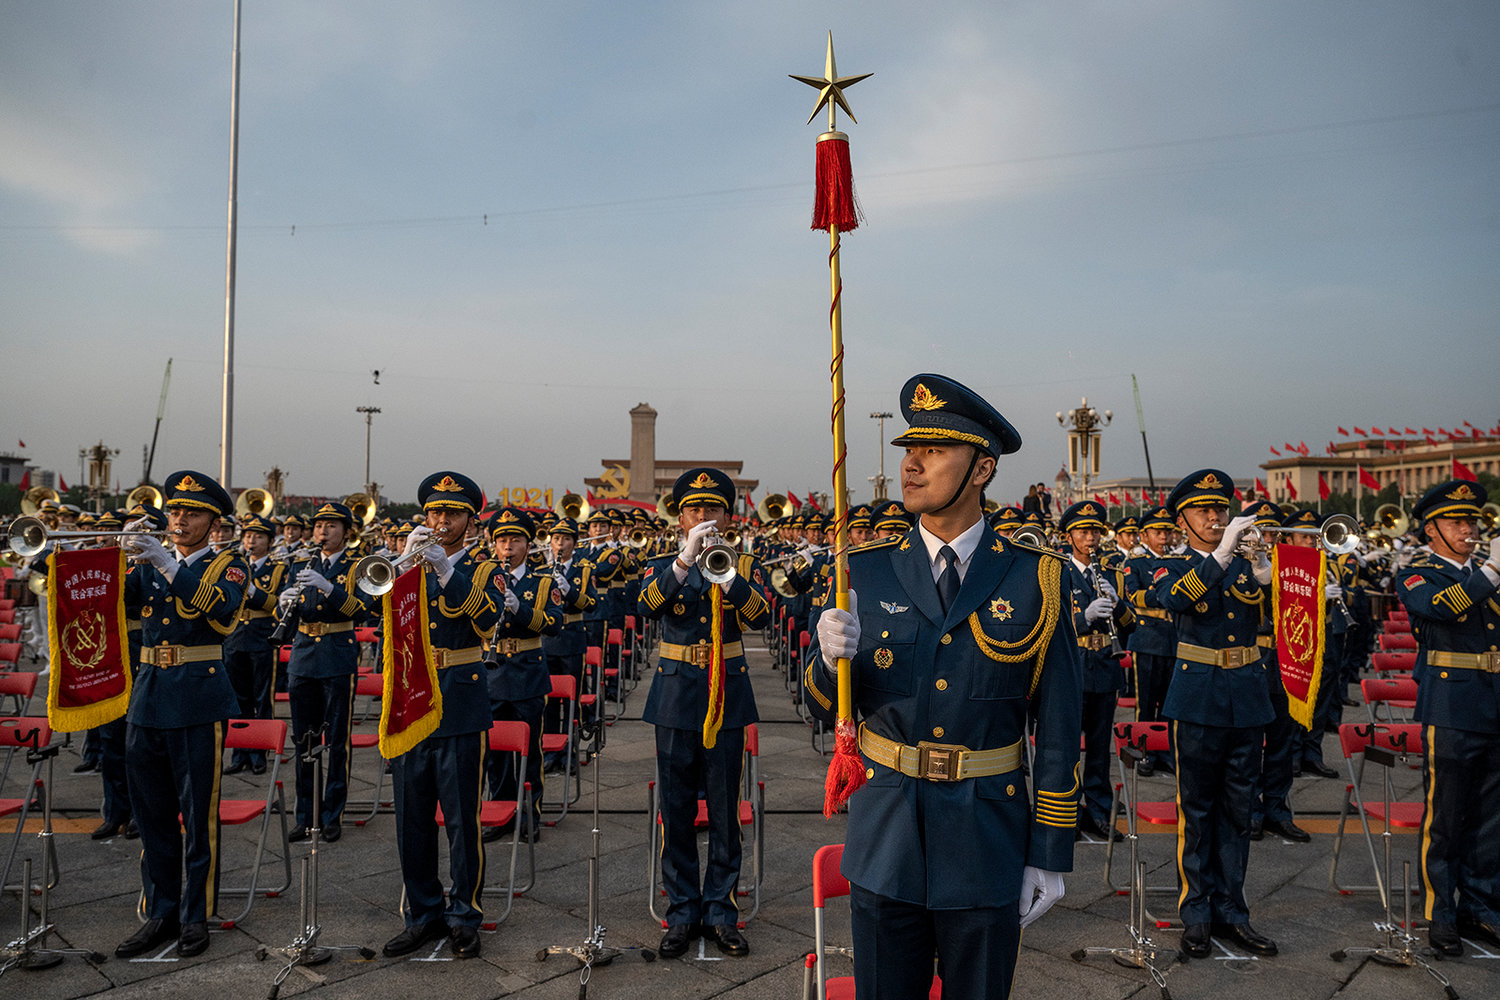 A Chinese military band conductor stands in front of band members at a ceremony marking the 100th anniversary of the Communist Party on July 1, 2021 at Tiananmen Square in Beijing, China. (Kevin Frayer/Getty Images/TNS)